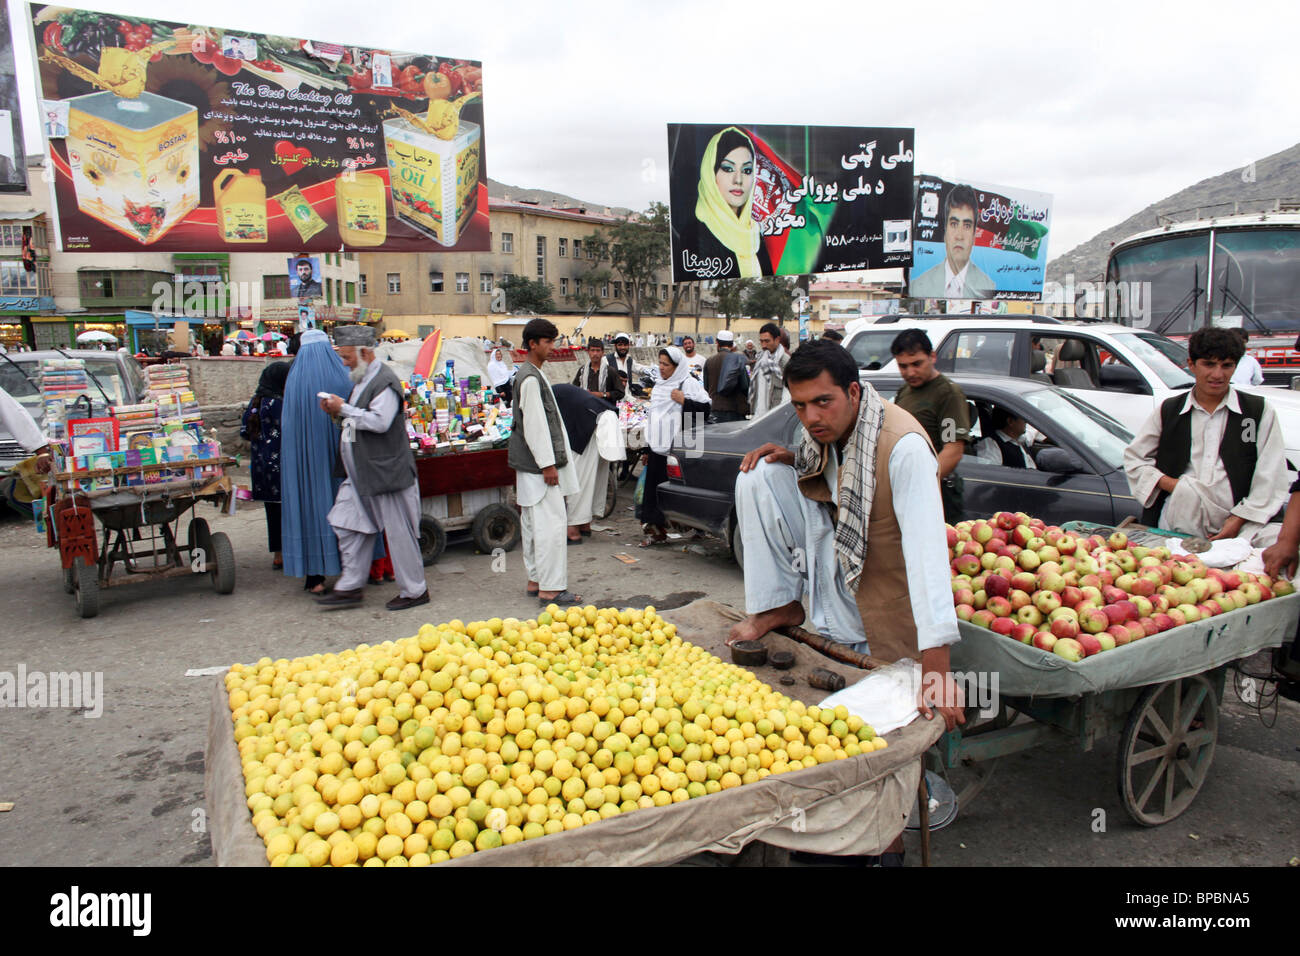 posters for parliamentary elections (September 2010) in kabul Stock Photo